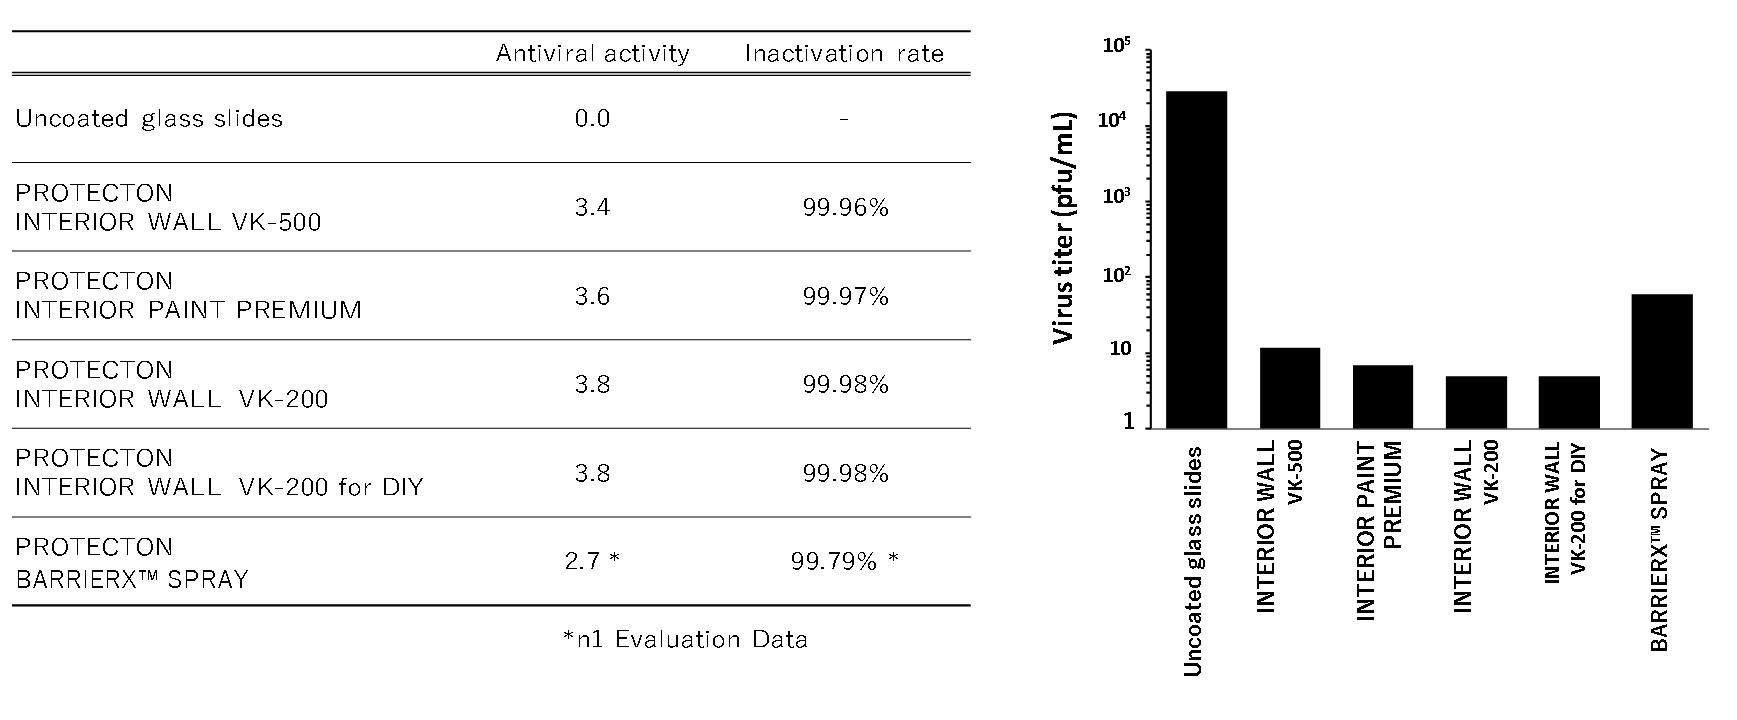 Evaluation results using the Alpha variant